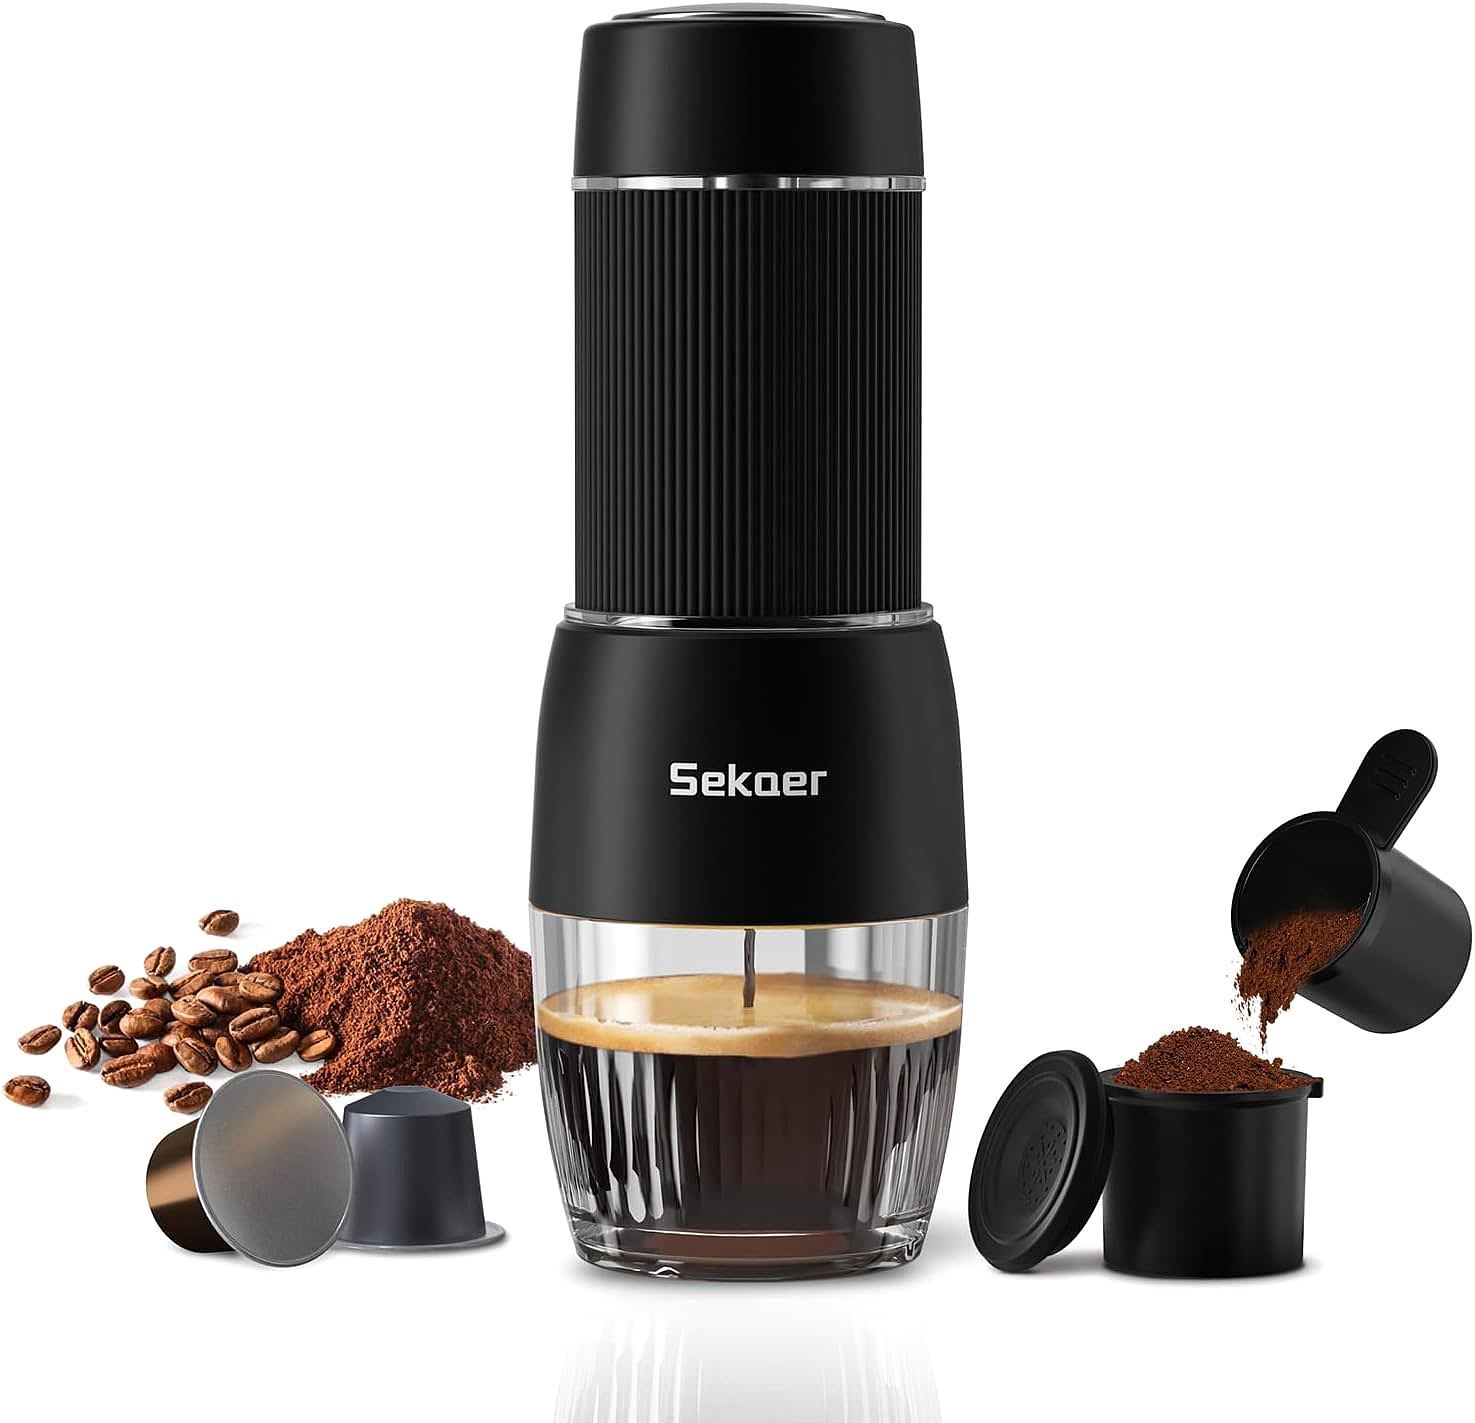 Sekaer MC101 Portable Espresso Machine: A Must-Have for Coffee Lovers on the Go